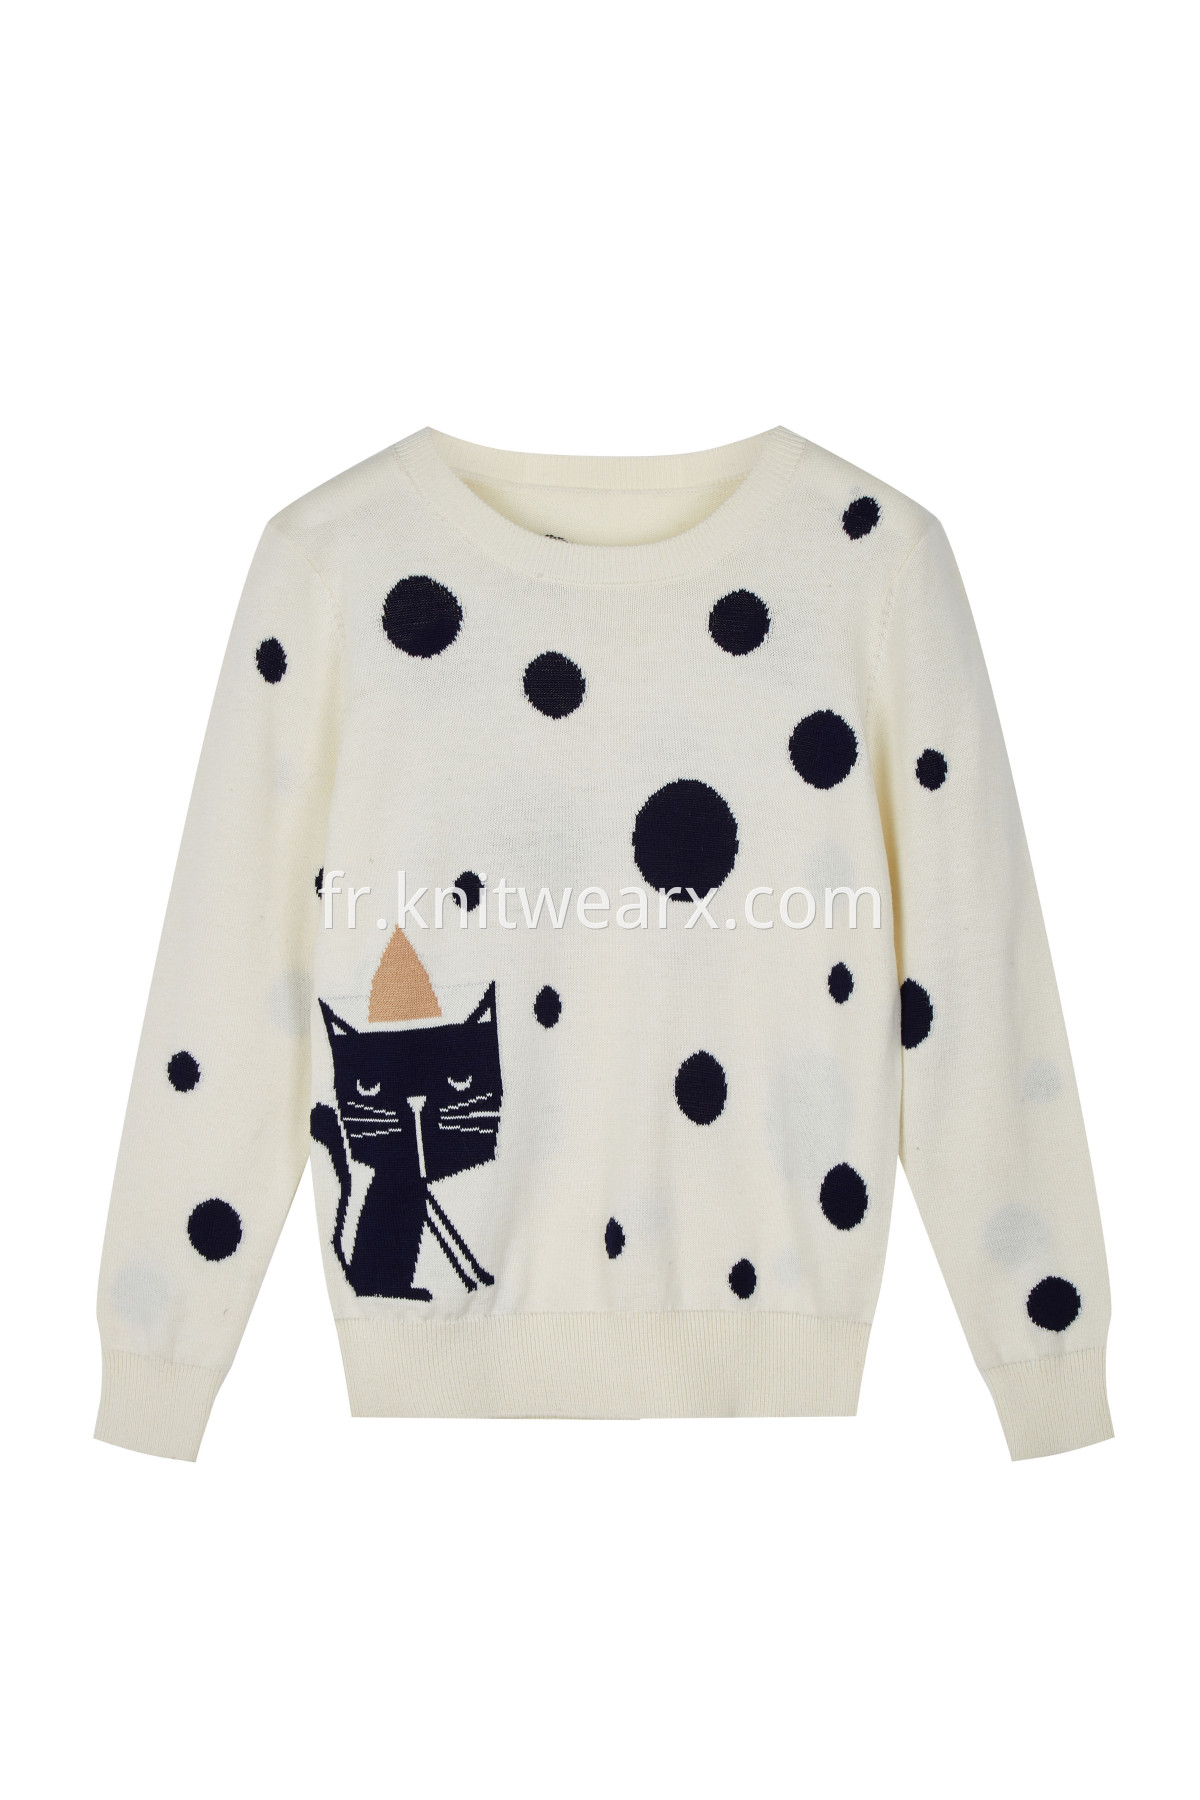 Girls's Cute Cat Jacquard Sweaters Funny Long Sleeves Pullover Top